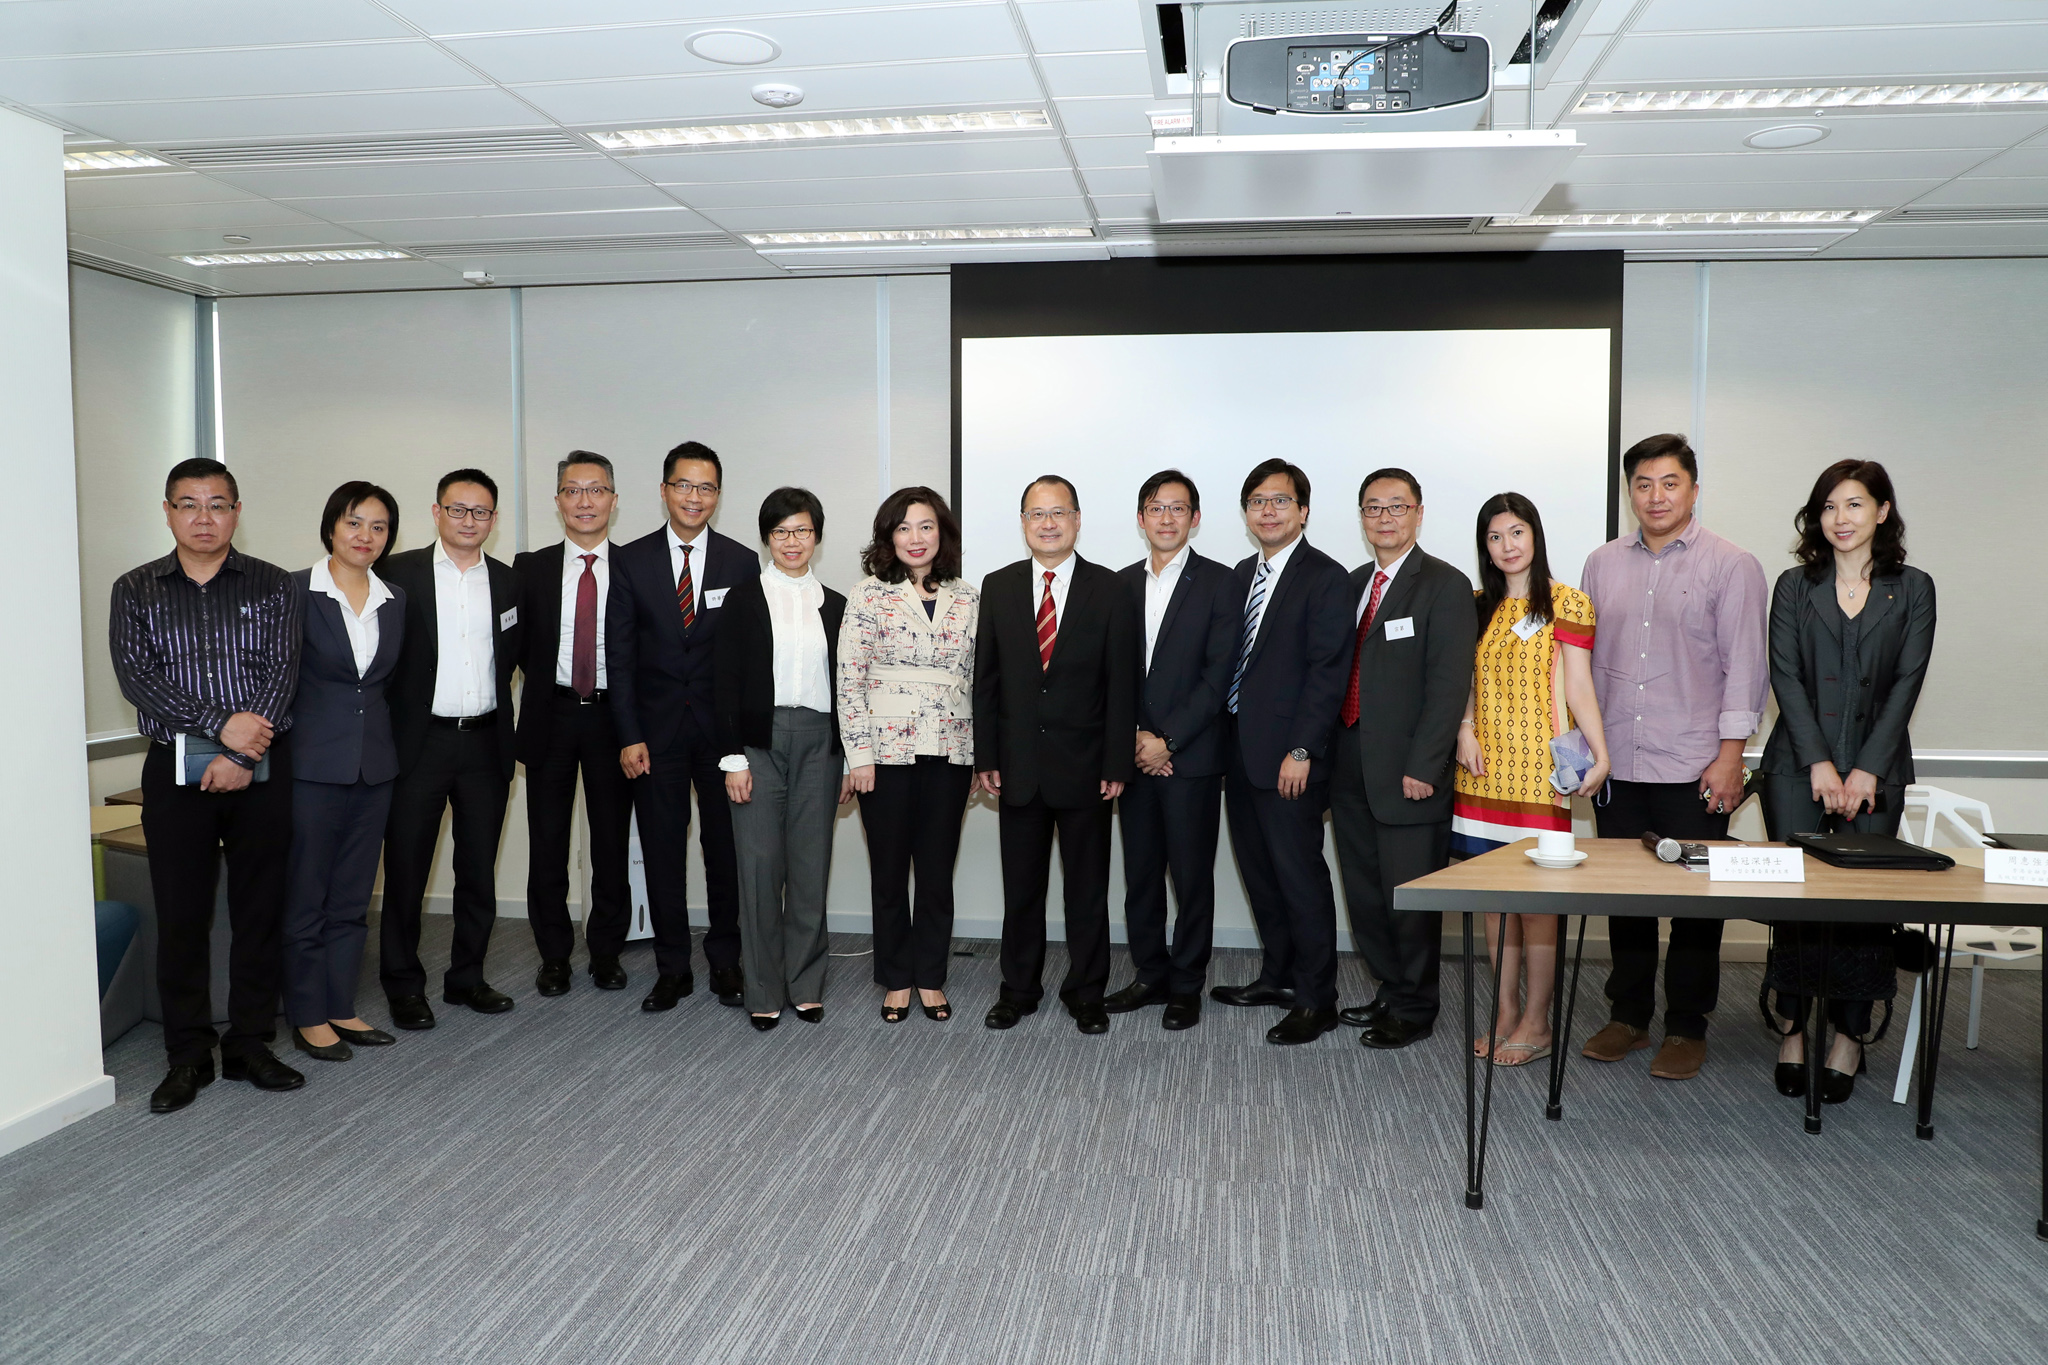 Photo26 : The Small and Medium Enterprises Committee met with local SME associations on 21 November 2018 to exchange views on the latest Fintech development in Hong Kong.  Representatives from the Hong Kong Monetary Authority were invited to introduce the recently launched Fintech initiatives, including Faster Payment System, Virtual Banking and Common QR Code.